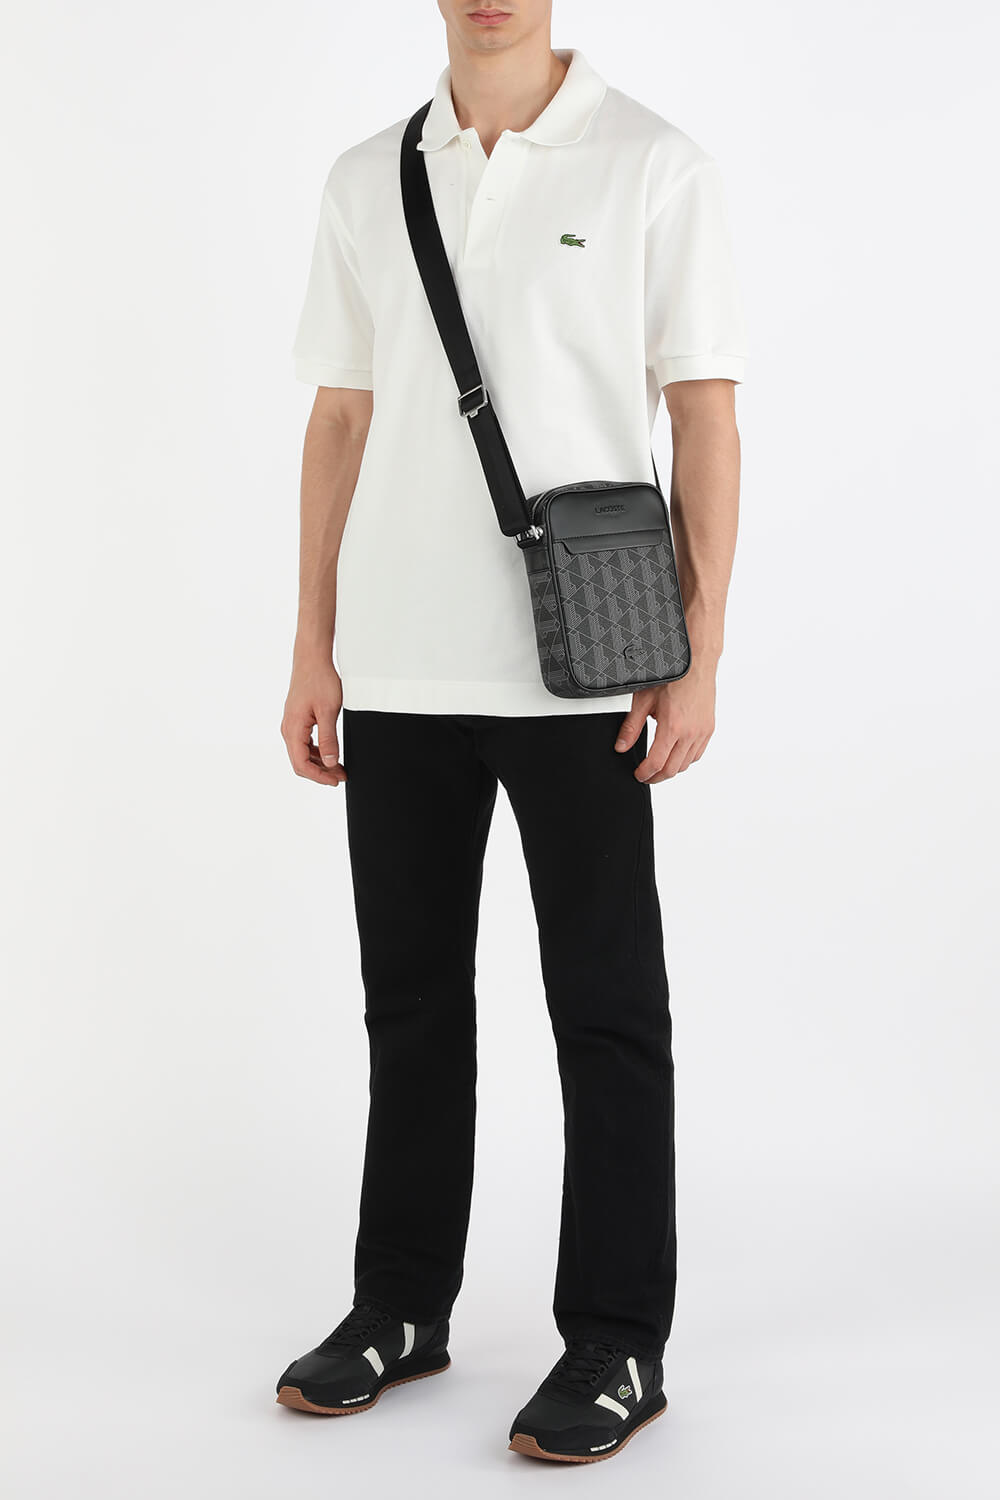 The Blend Monogram Canvas Vertical Bag In Grey And Black LACOSTE